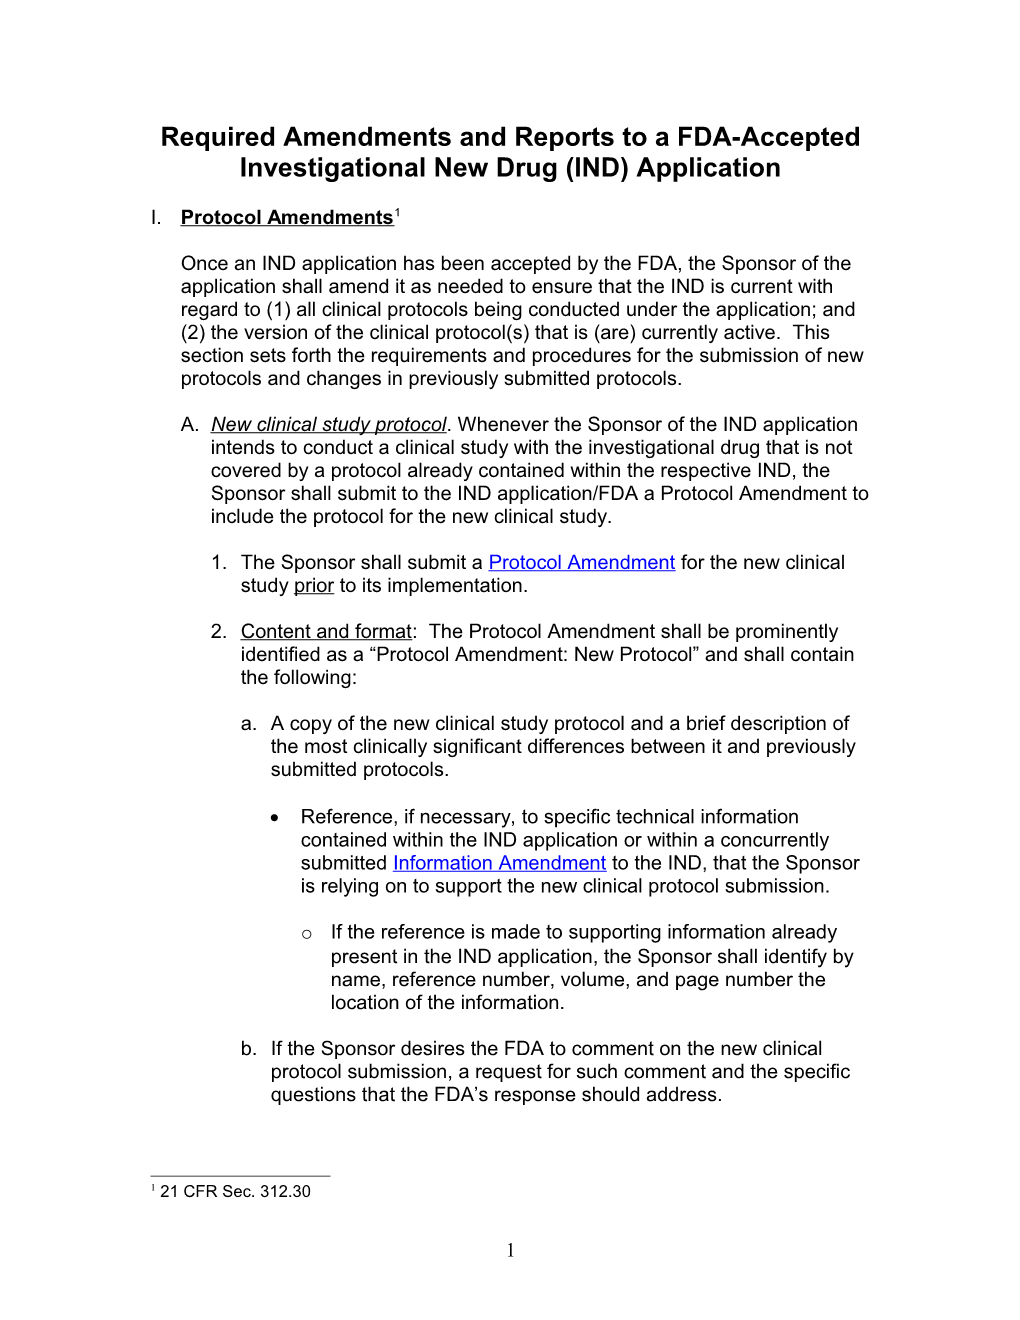 Required Reports to a FDA-Accepted Investigational New Drug (IND) Application